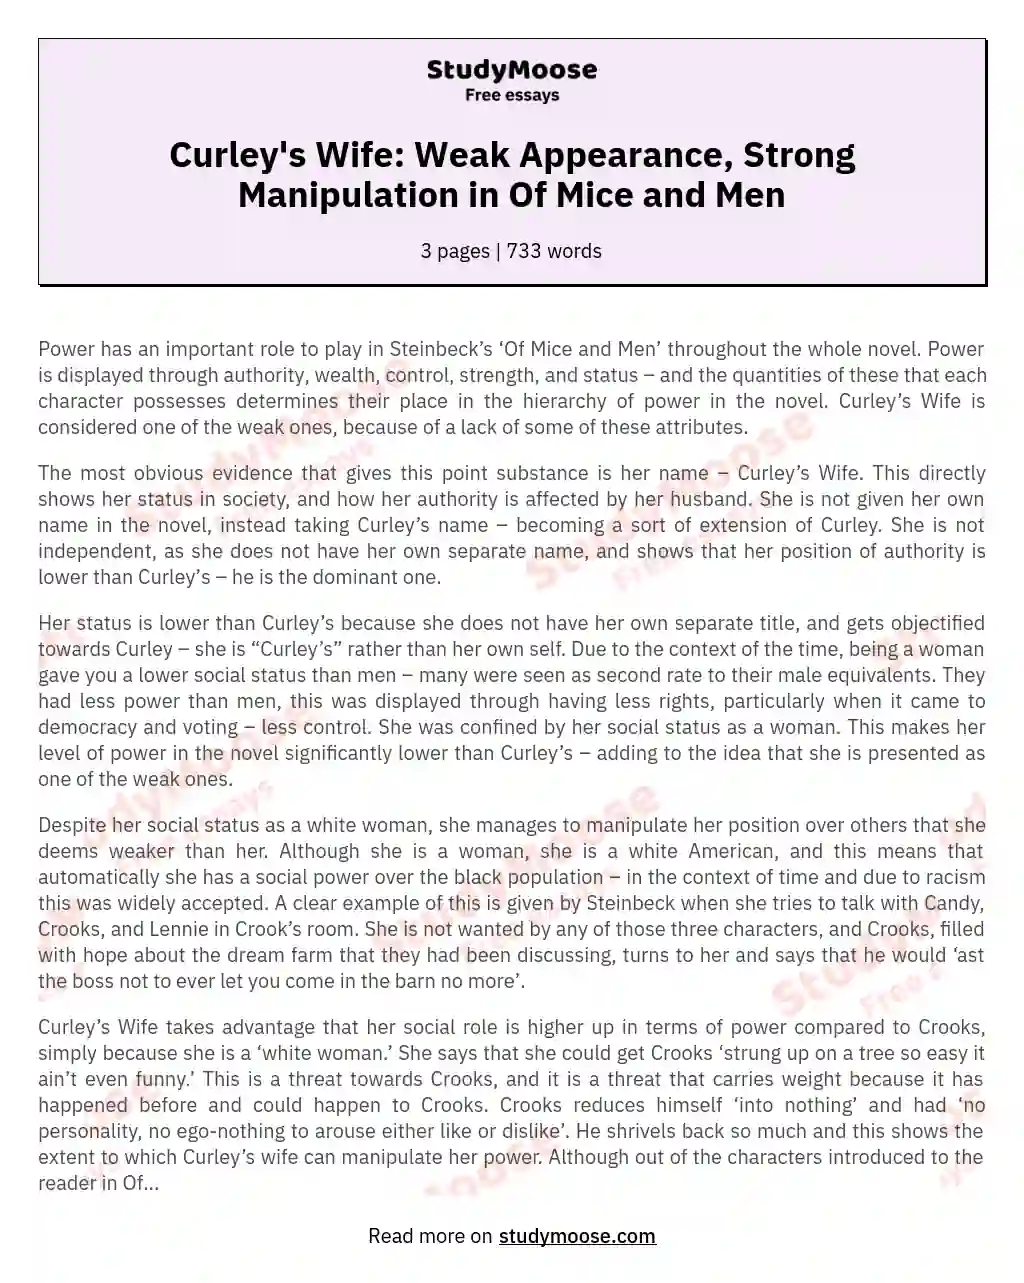 How does Curleys Wife appear to be weak In Of Mice and Men and how does she manipulate her power?